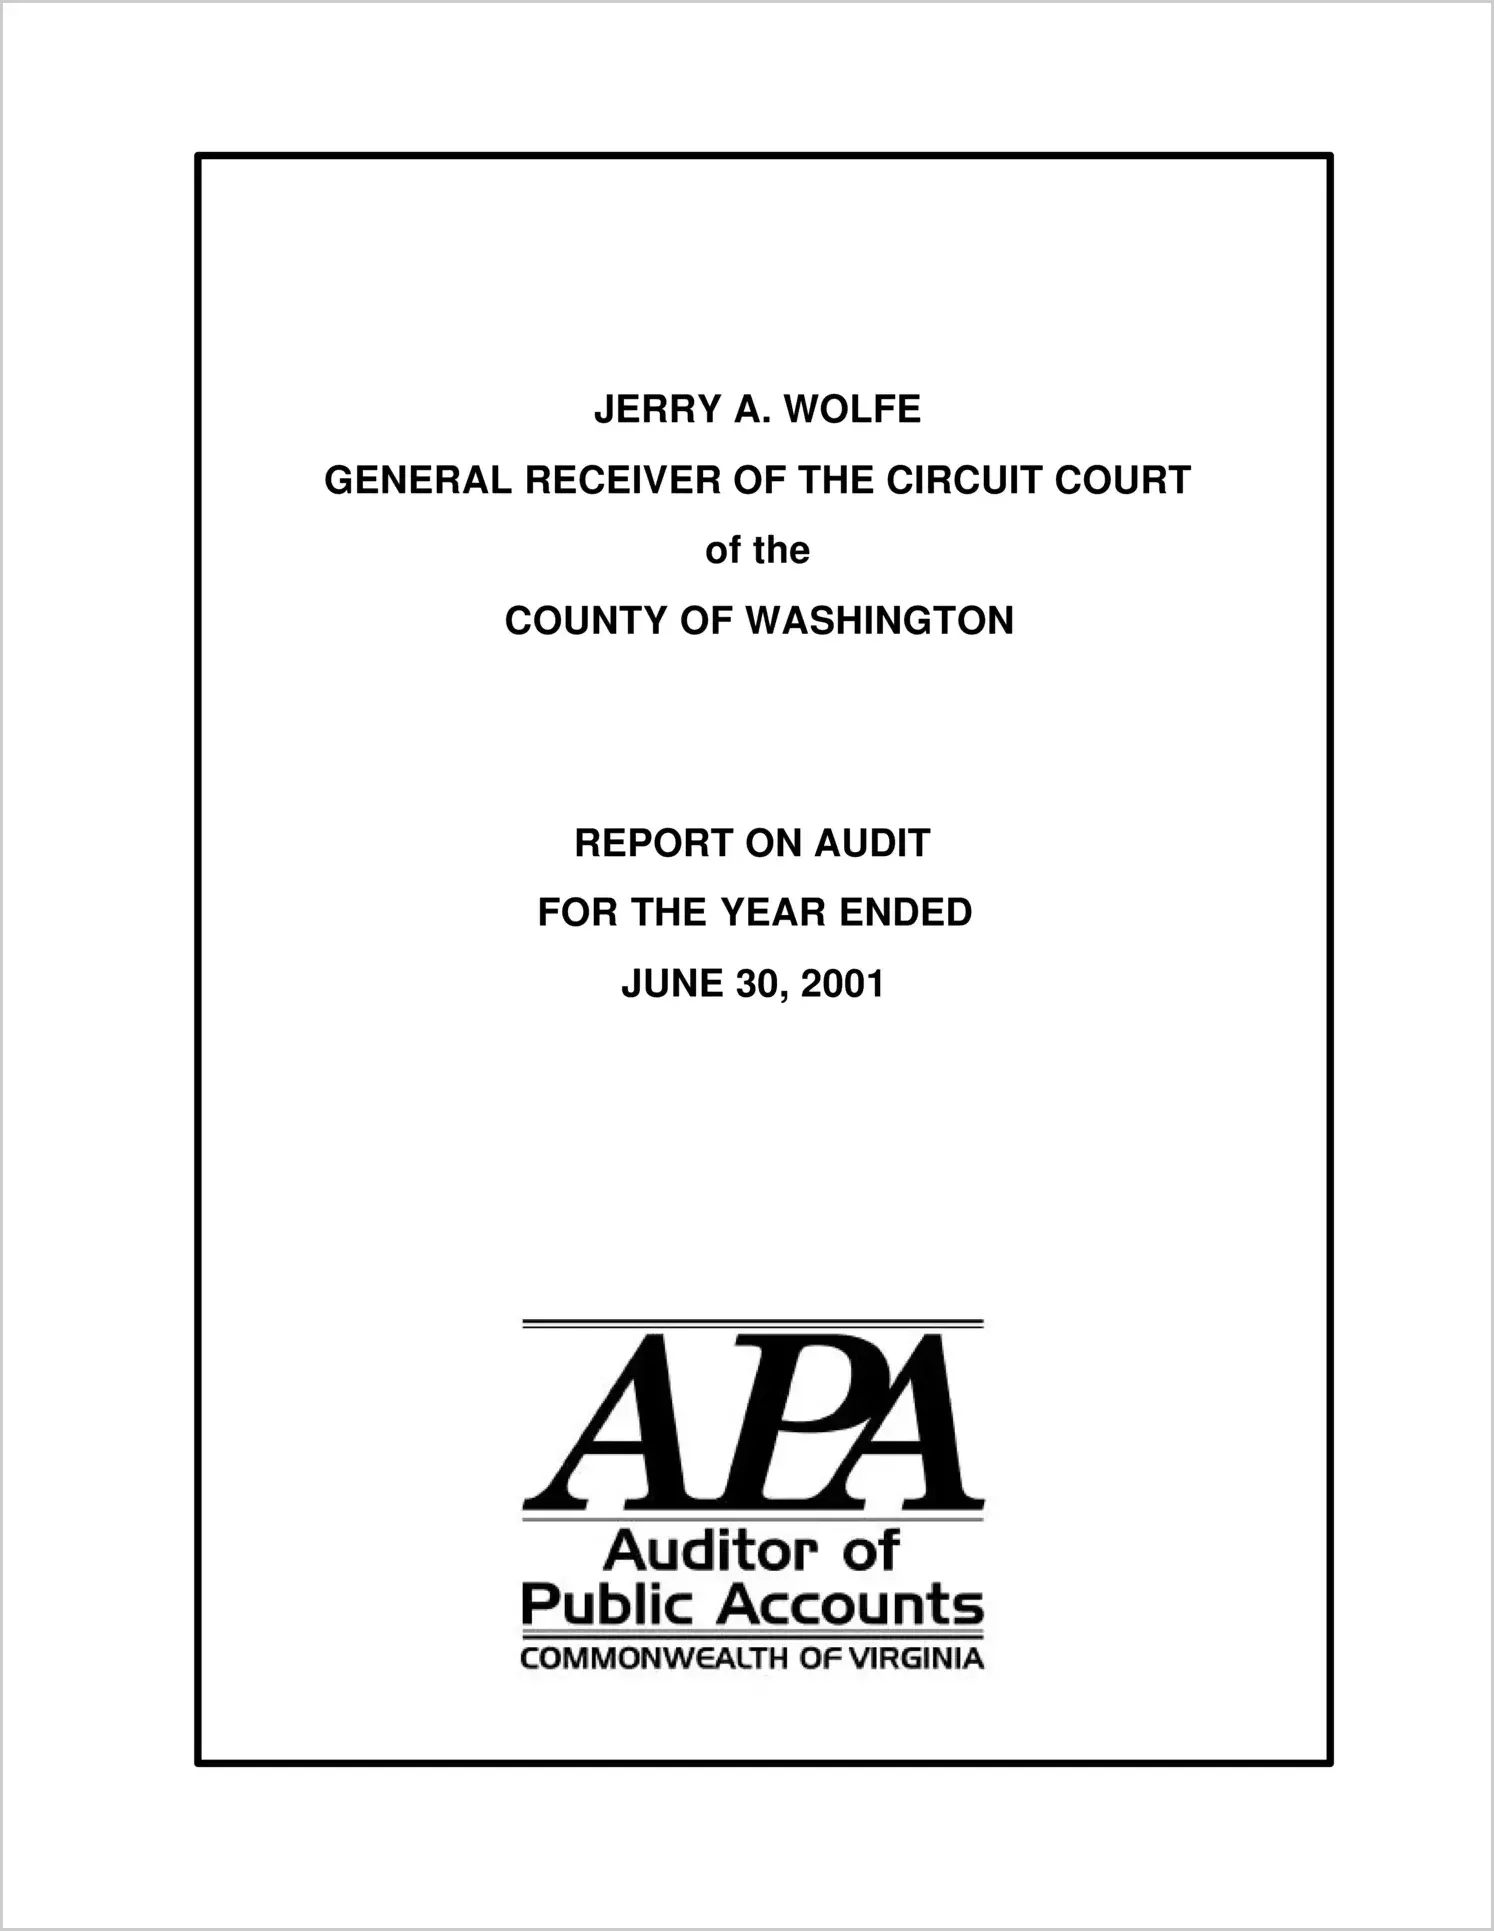 General Receiver of the Circuit Court of the County of Washington for the year ended June 30, 2001